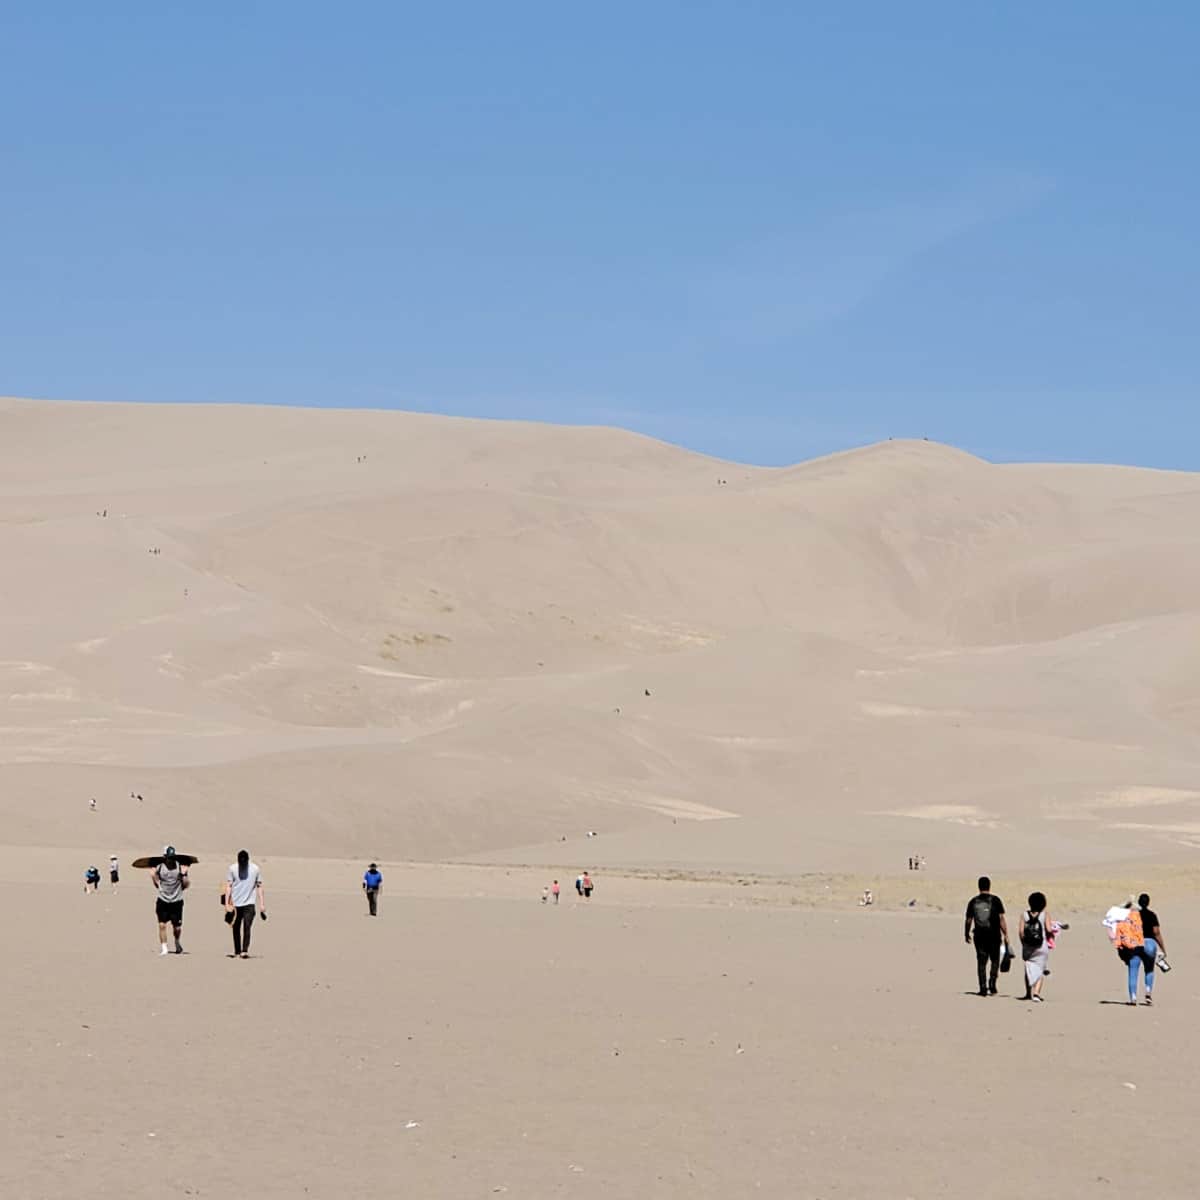 Hiking in the sand at Great Sand Dunes National Park